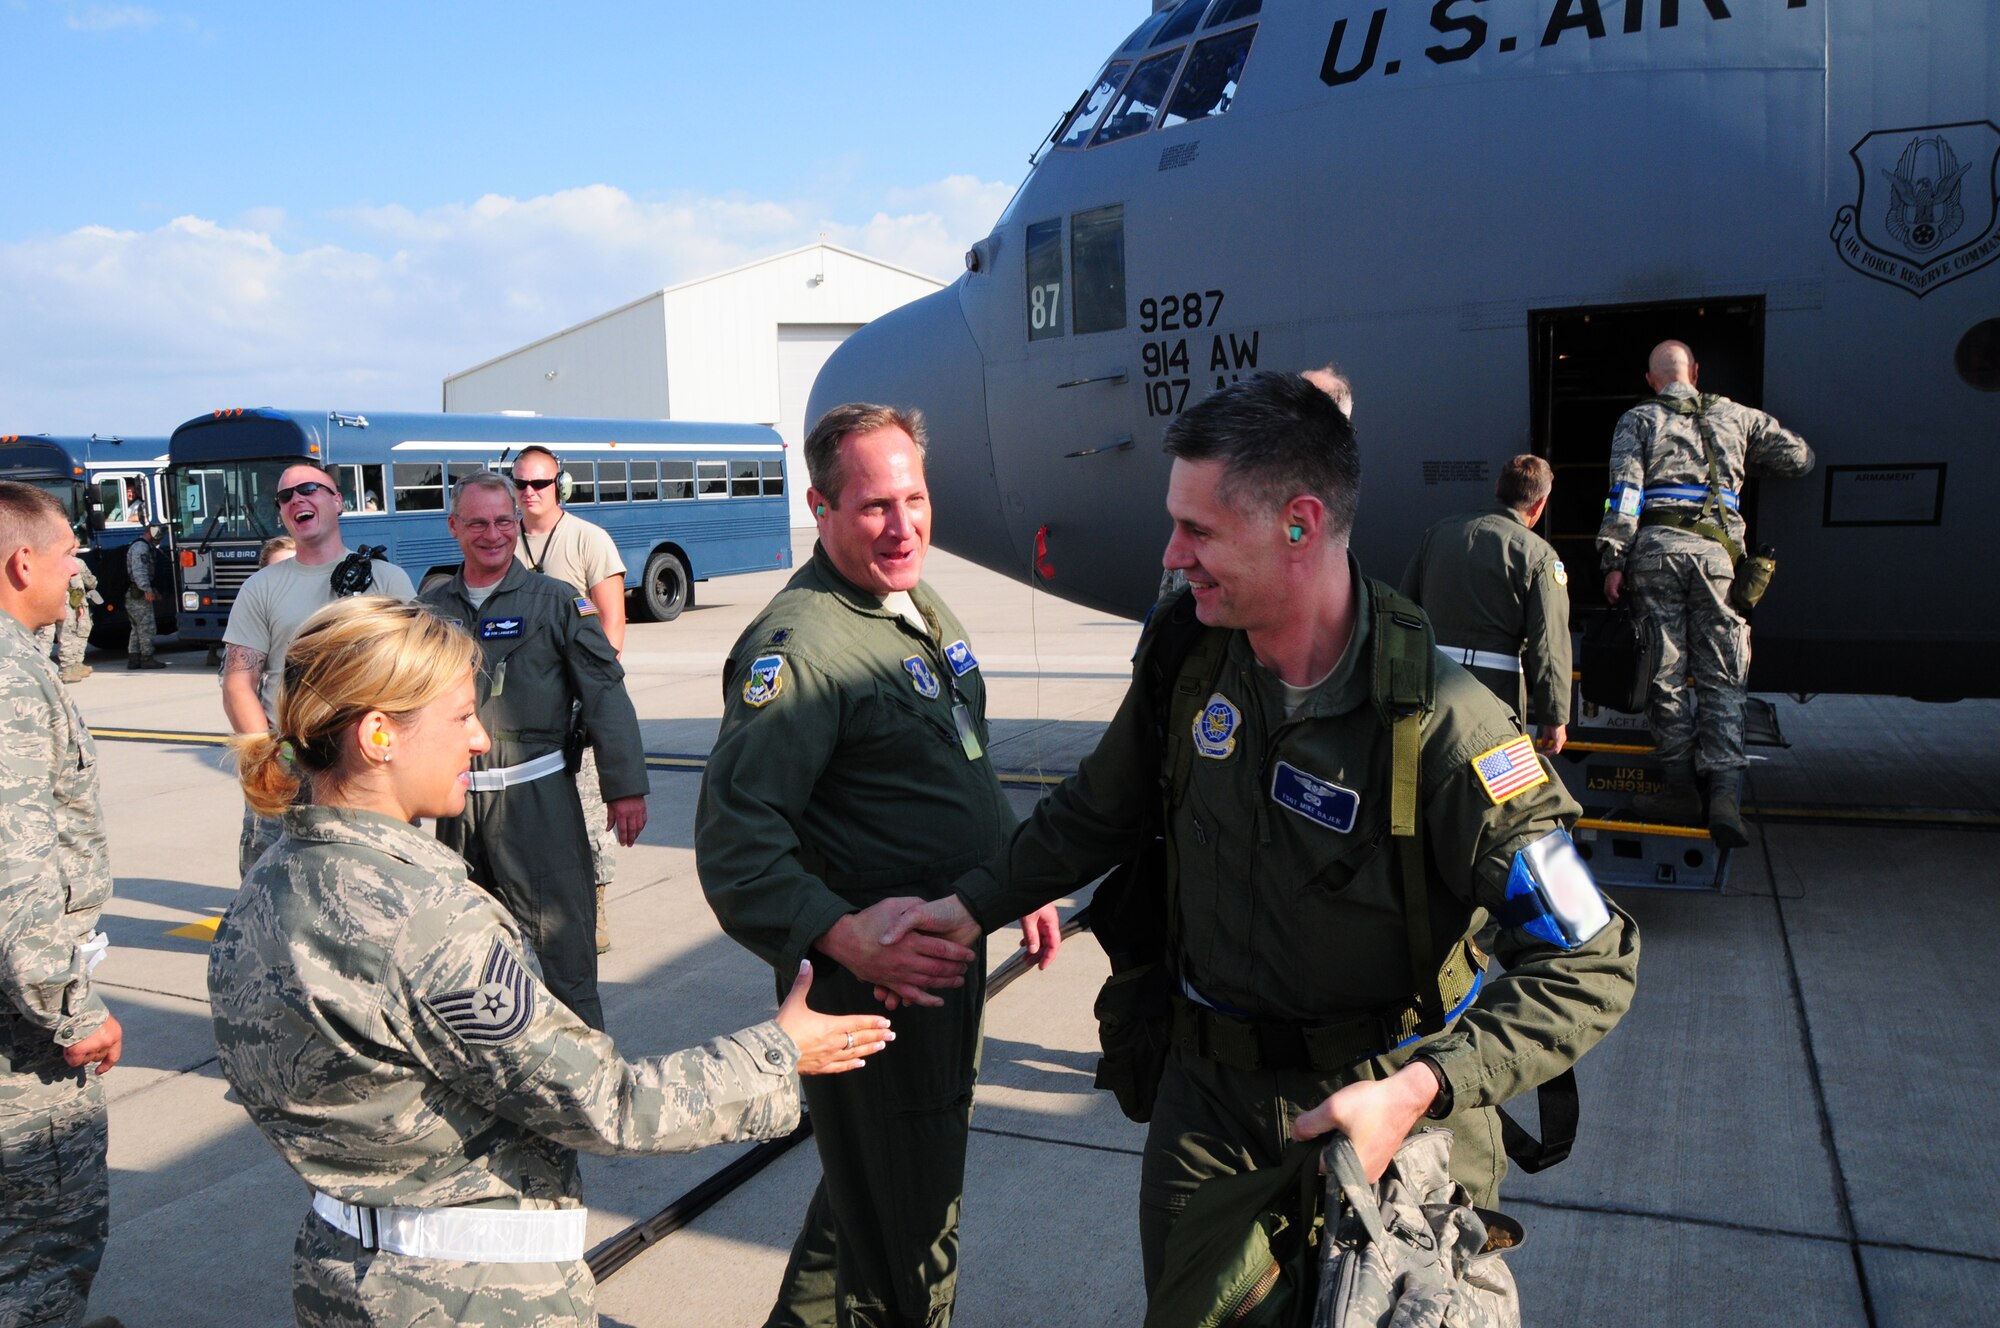 On July 24, 2012 It is all smiles as members from the 107th and 914th Airlift Wings return home. Both units deployed to Alpena, Michigan for thier Operational Readiness Inspection (ORI). Tech Sgt. Mike Bajer107th C-130 Flight Engineer  is greeted by Lt. Col. Dave Durkee, 107th Wing Plans  and Tech Sgt. Krystalore Stegner  107th Recruiter. (U. S. Air Force Photo/SMSgt Ray Lloyd)